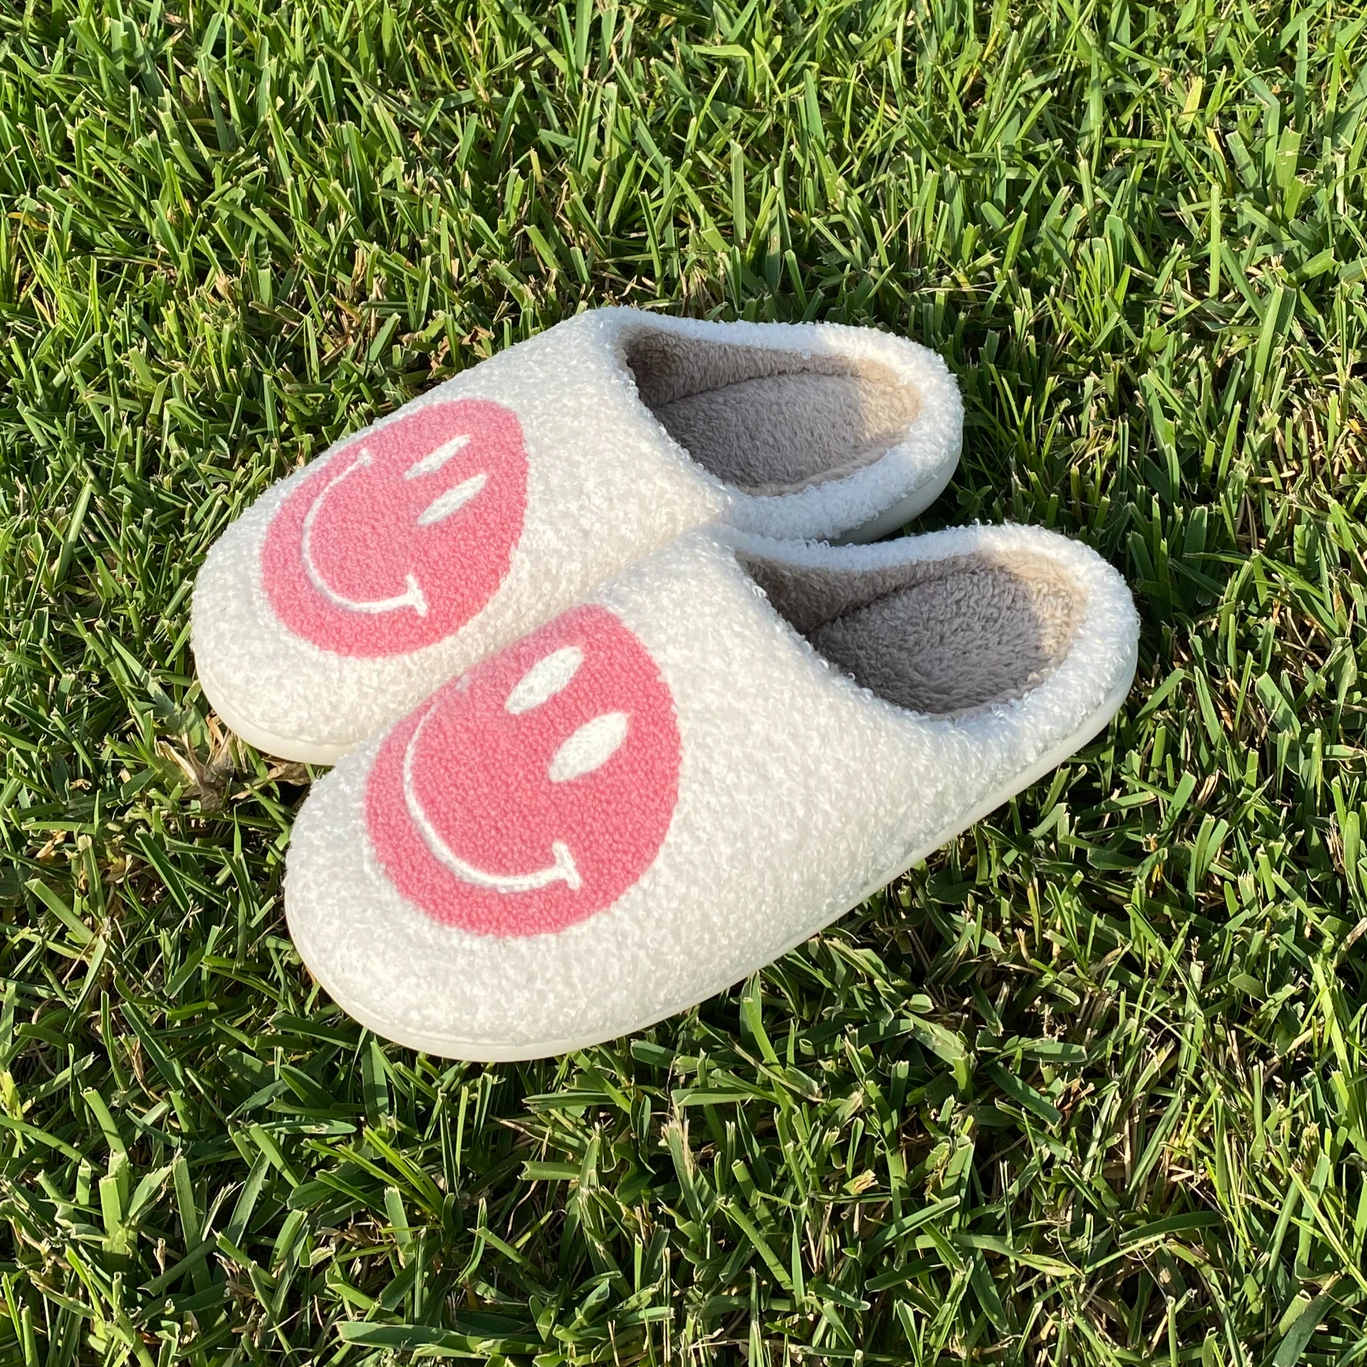 The Original Happy Home Slippers©